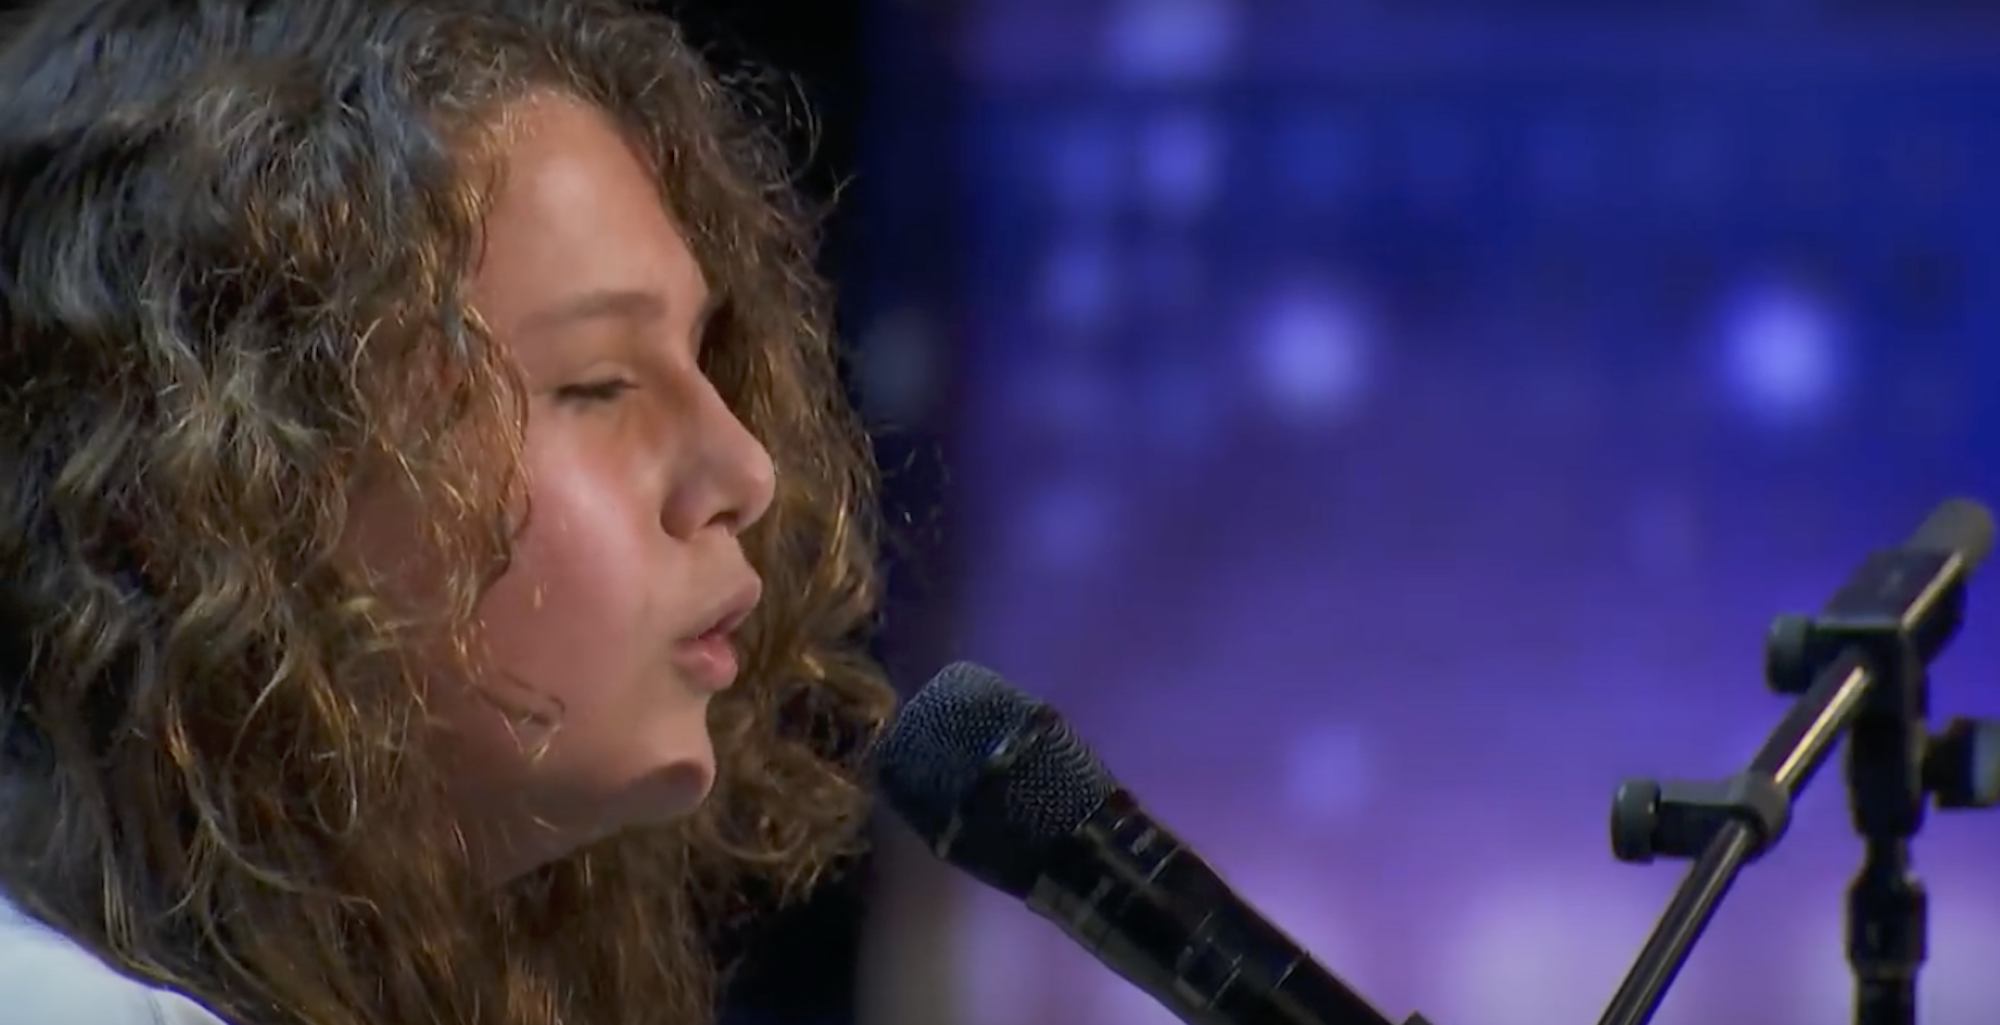 14-Year-Old ‘America’s Got Talent’ Contestant Takes on Queen’s “Somebody to Love”